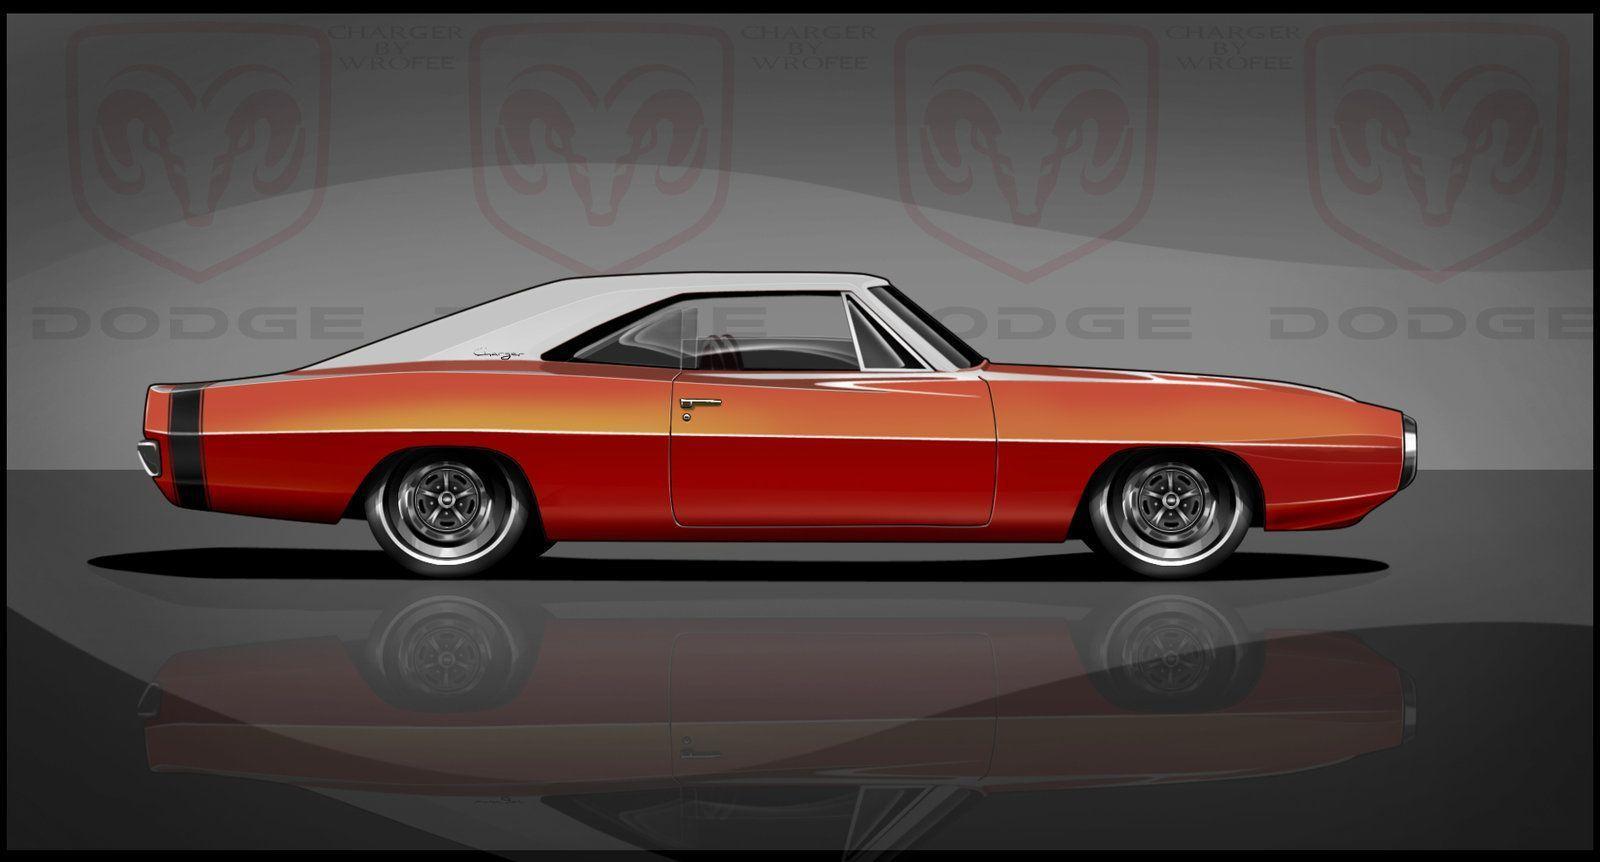 Dodge Charger Toon Update